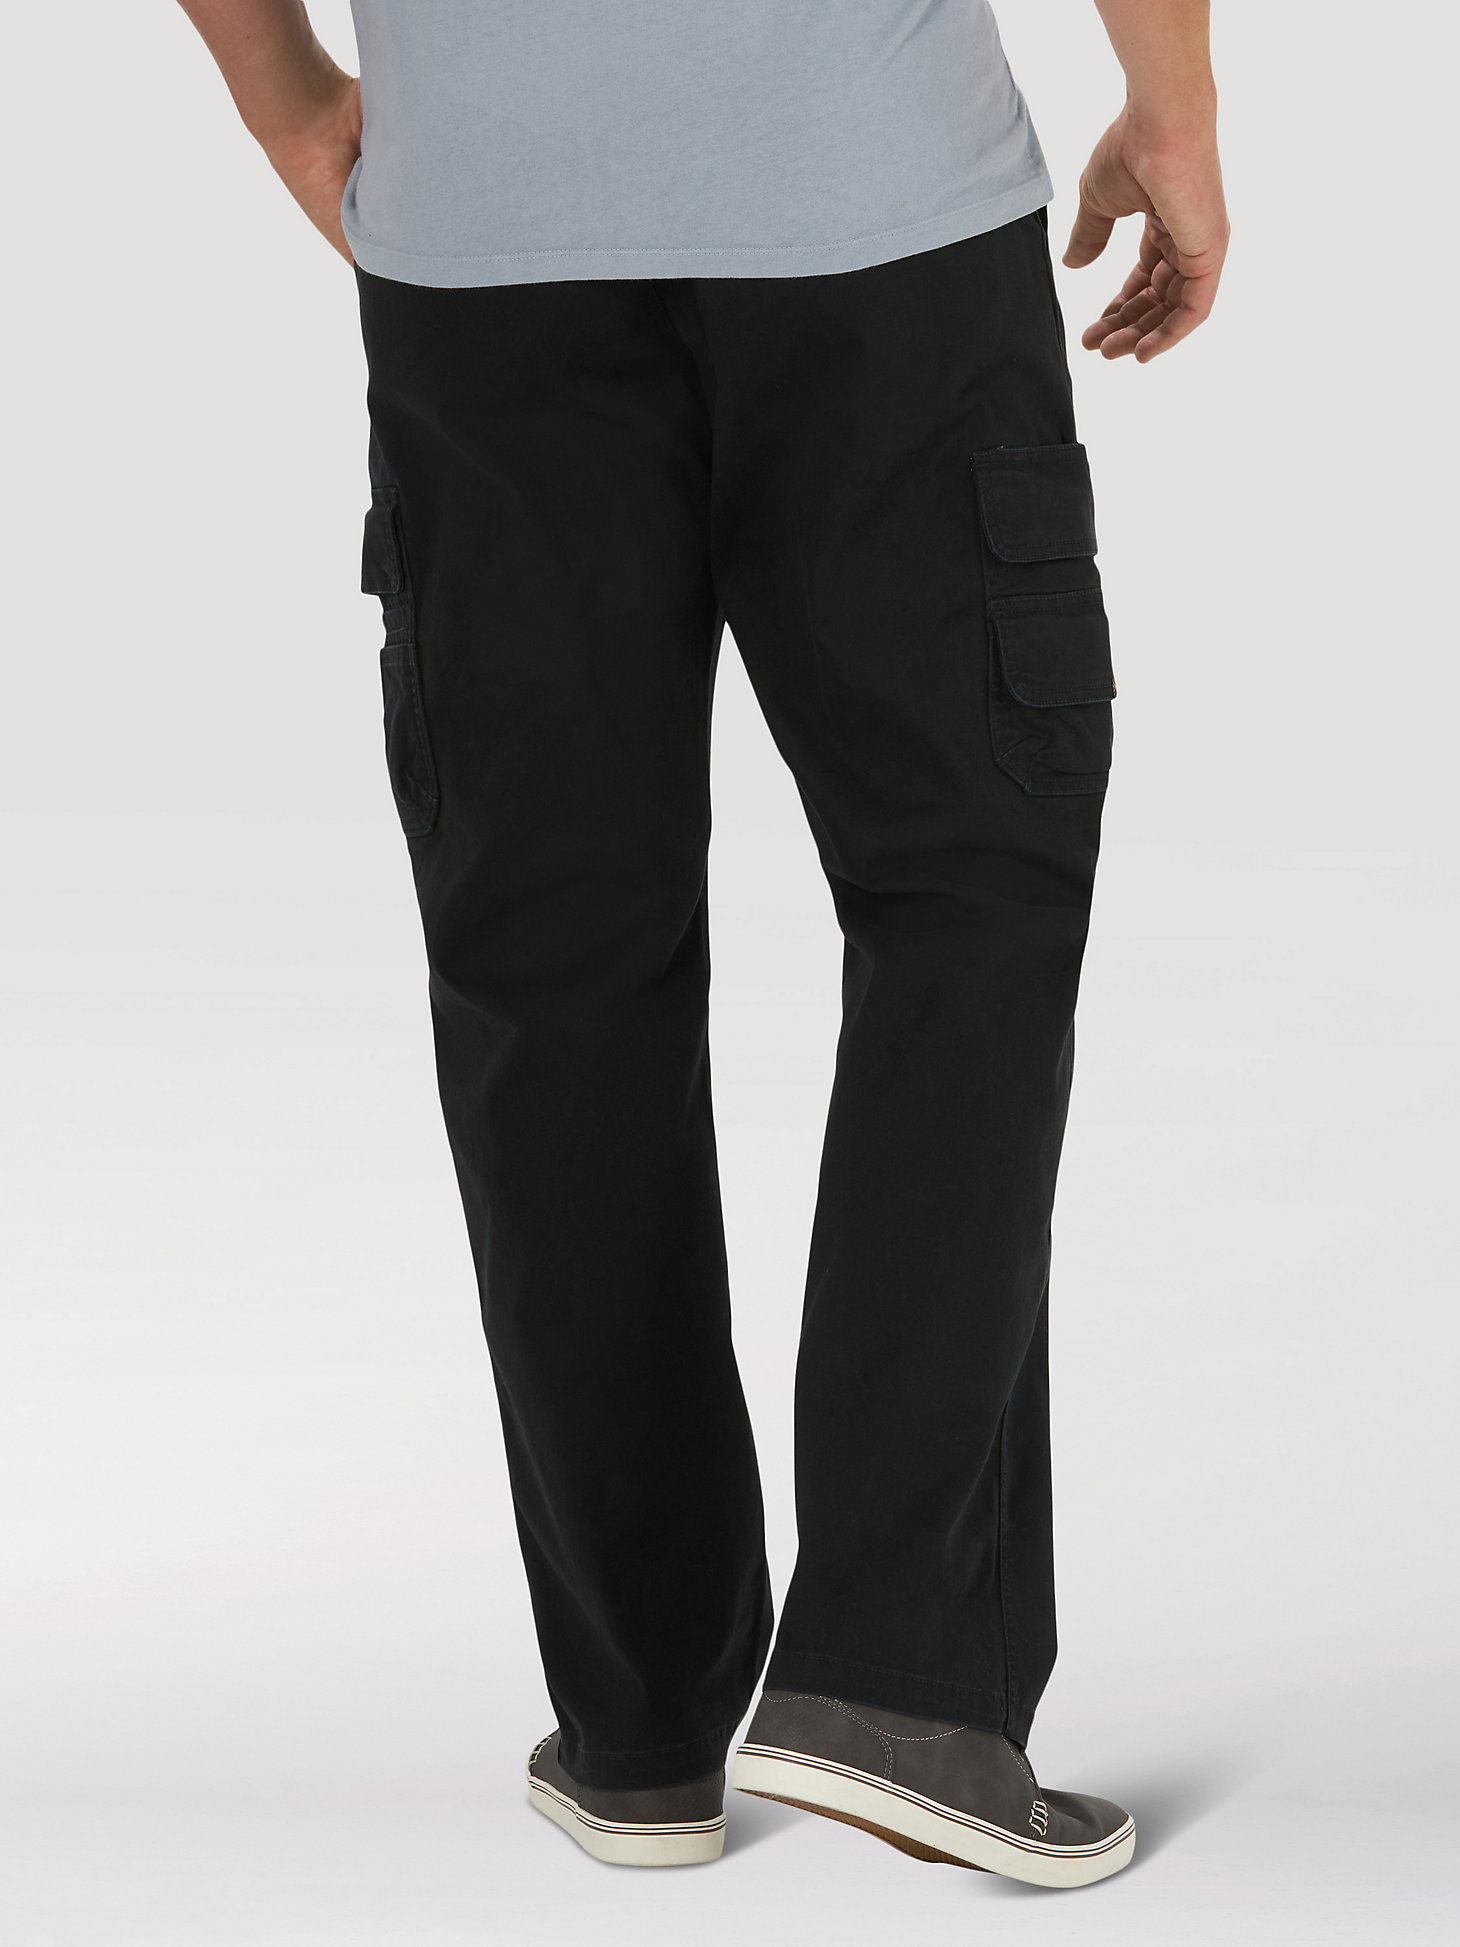 Men's Weather Anything™ Stretch Cargo Pant in George Black alternative view 1